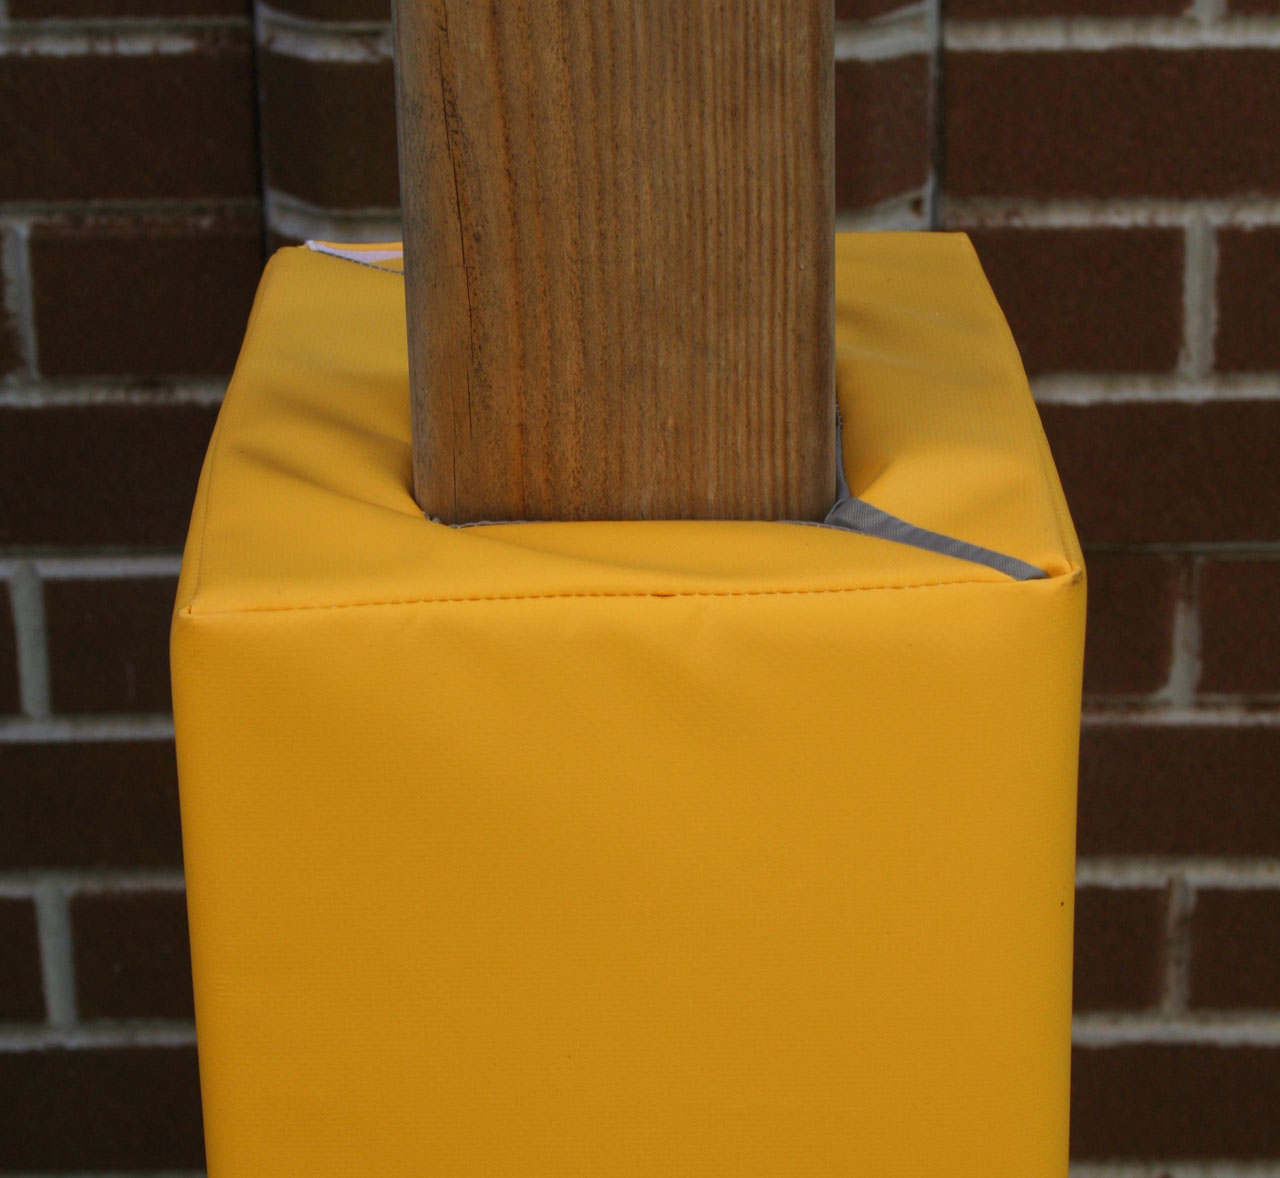 propads yellow post protector pad product shot